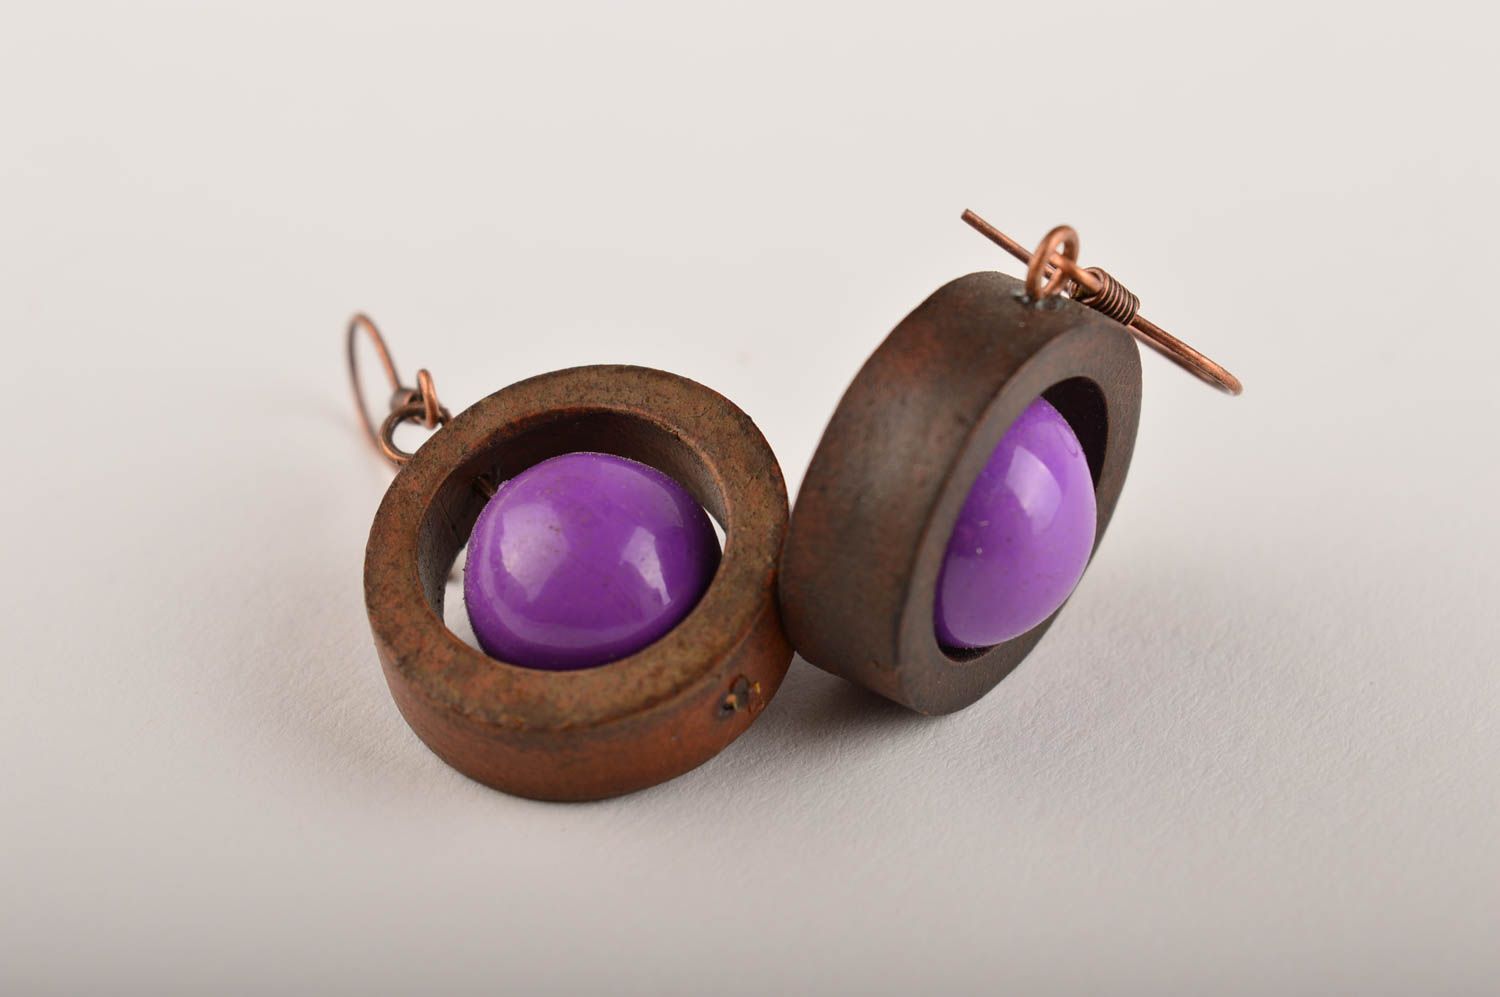 Round earrings homemade ceramic jewelry earrings for women gifts for her photo 4